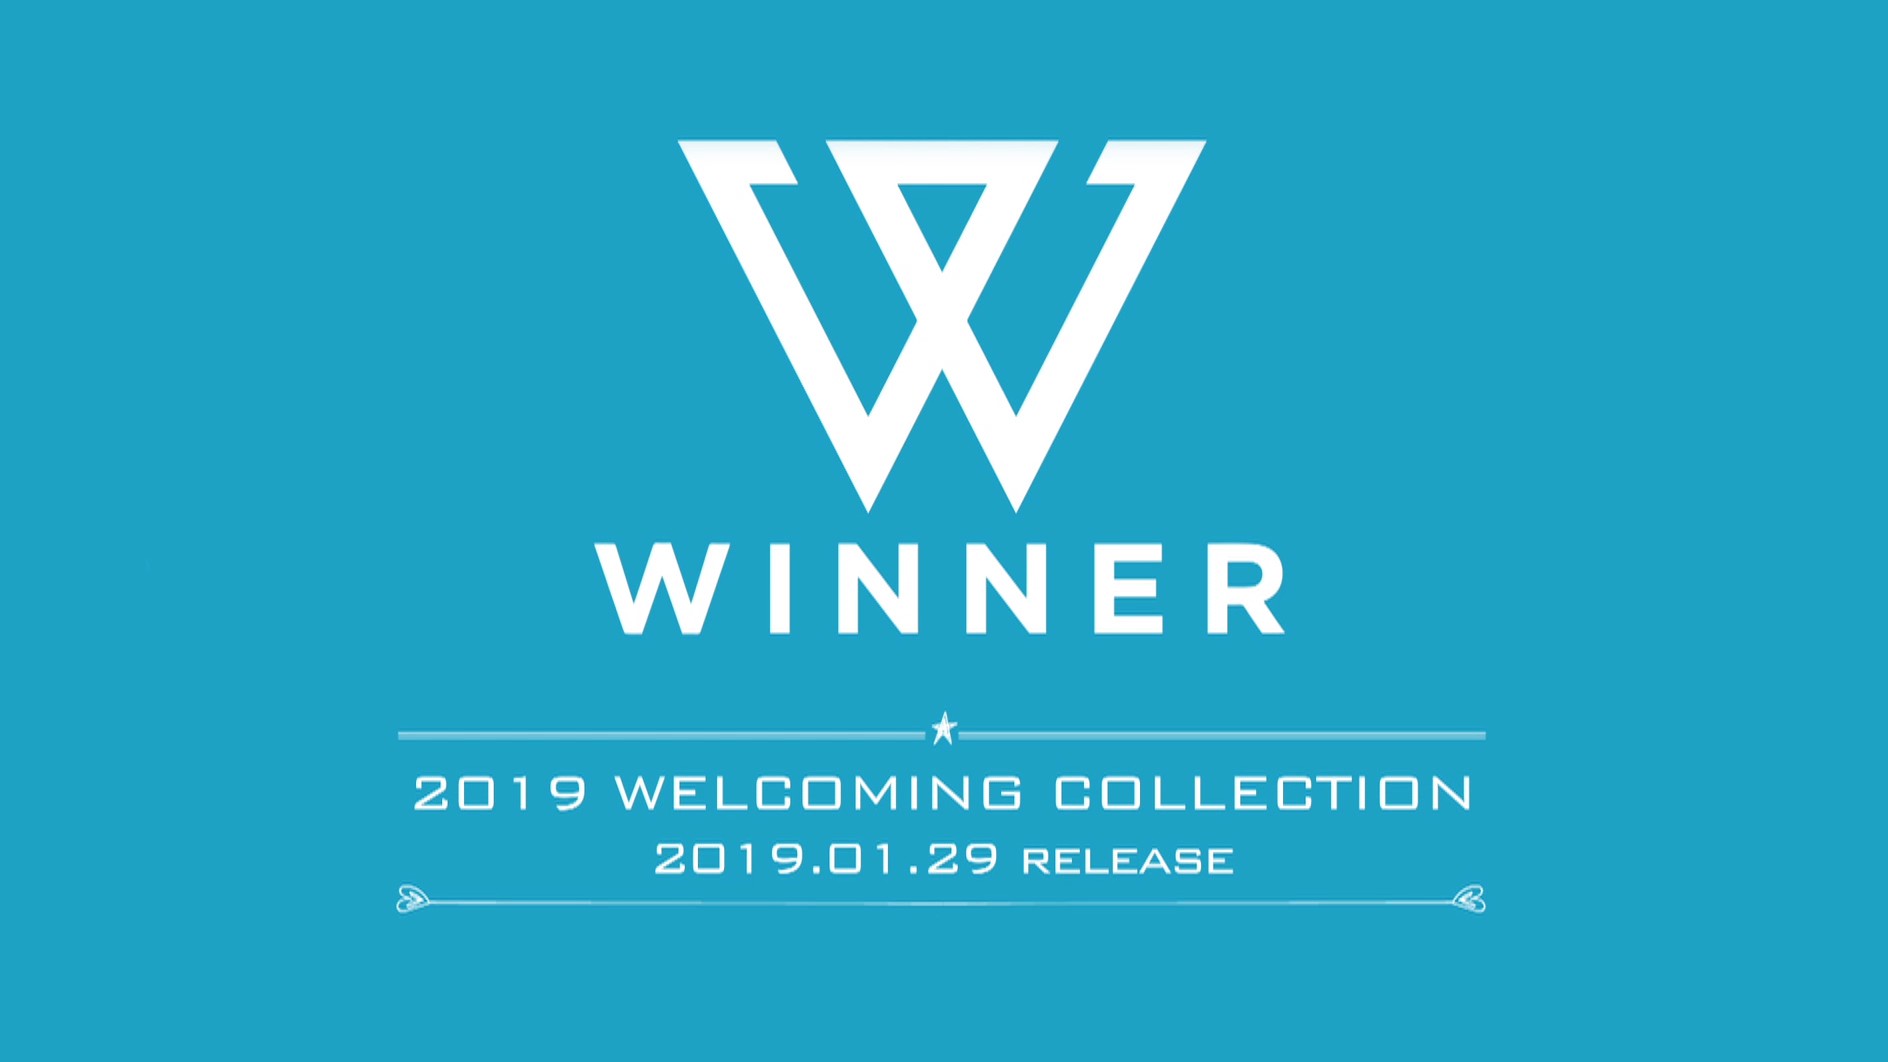 WINNER’S 2019 WELCOMING COLLECTION